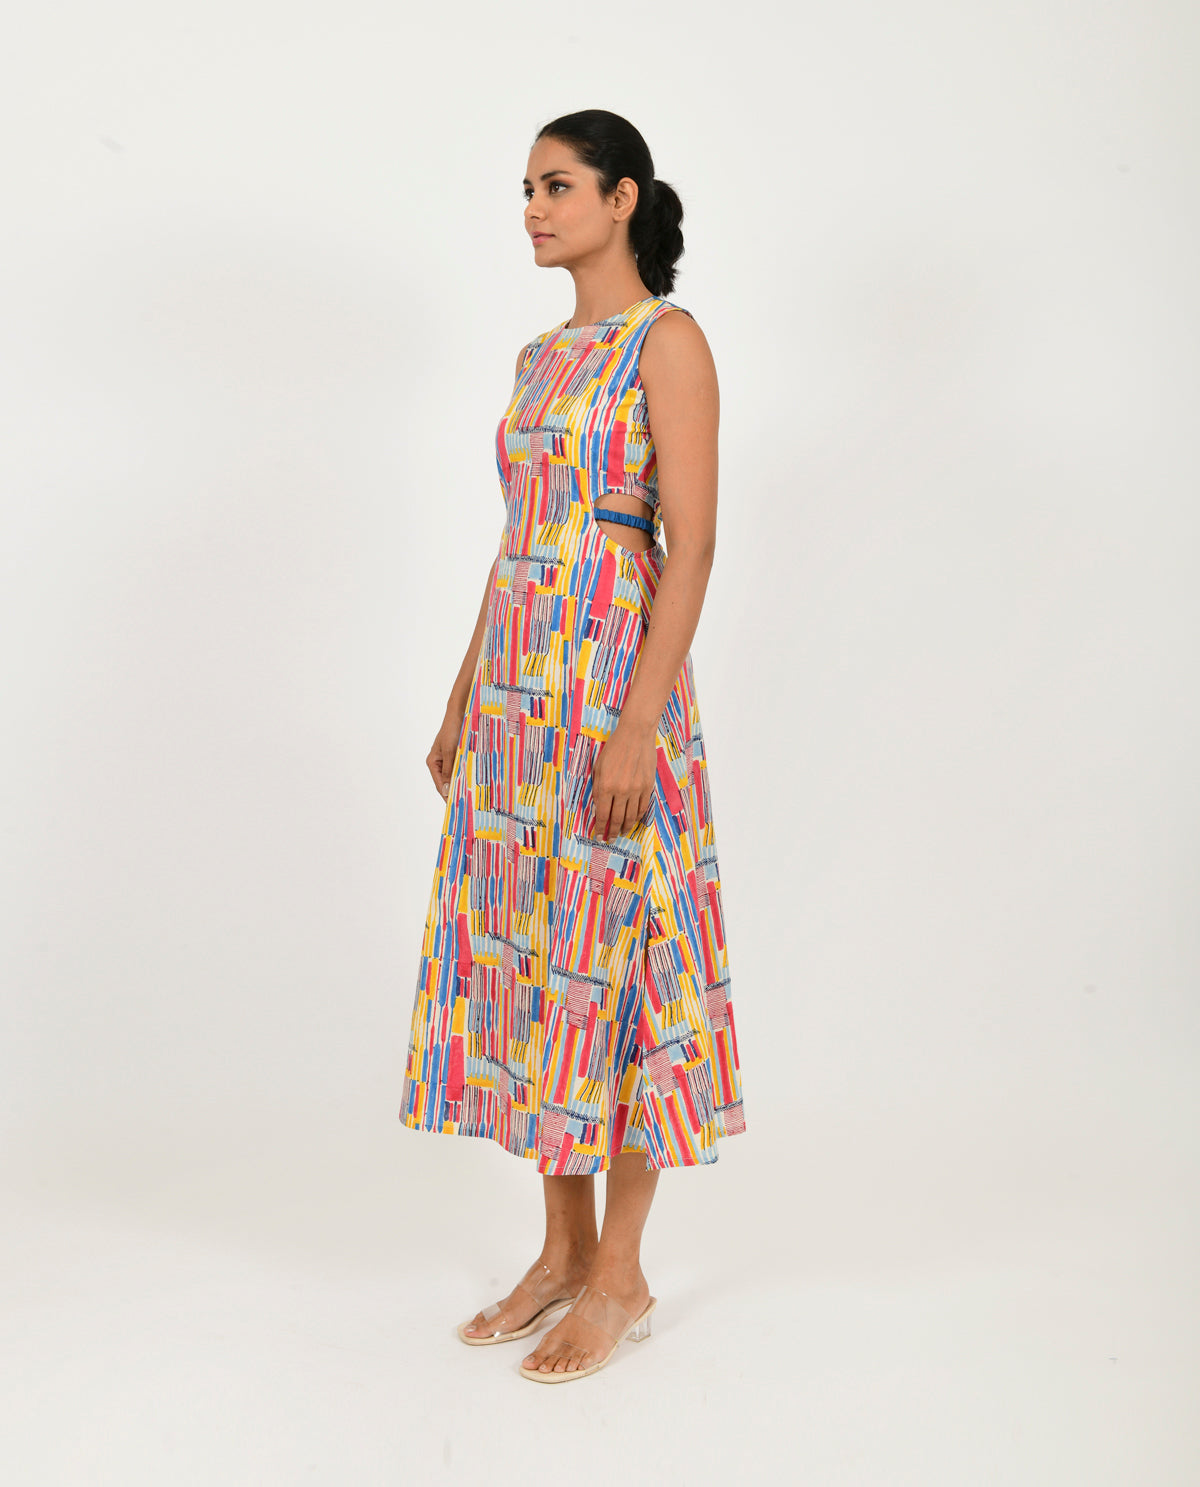 Multicolor Side Cut Dress at Kamakhyaa by Rias Jaipur. This item is Block Prints, Casual Wear, Linen Blend, Midi Dresses, Multicolor, Natural, Regular Fit, Scribble Prints, Sleeveless Dresses, Womenswear, Yaadein